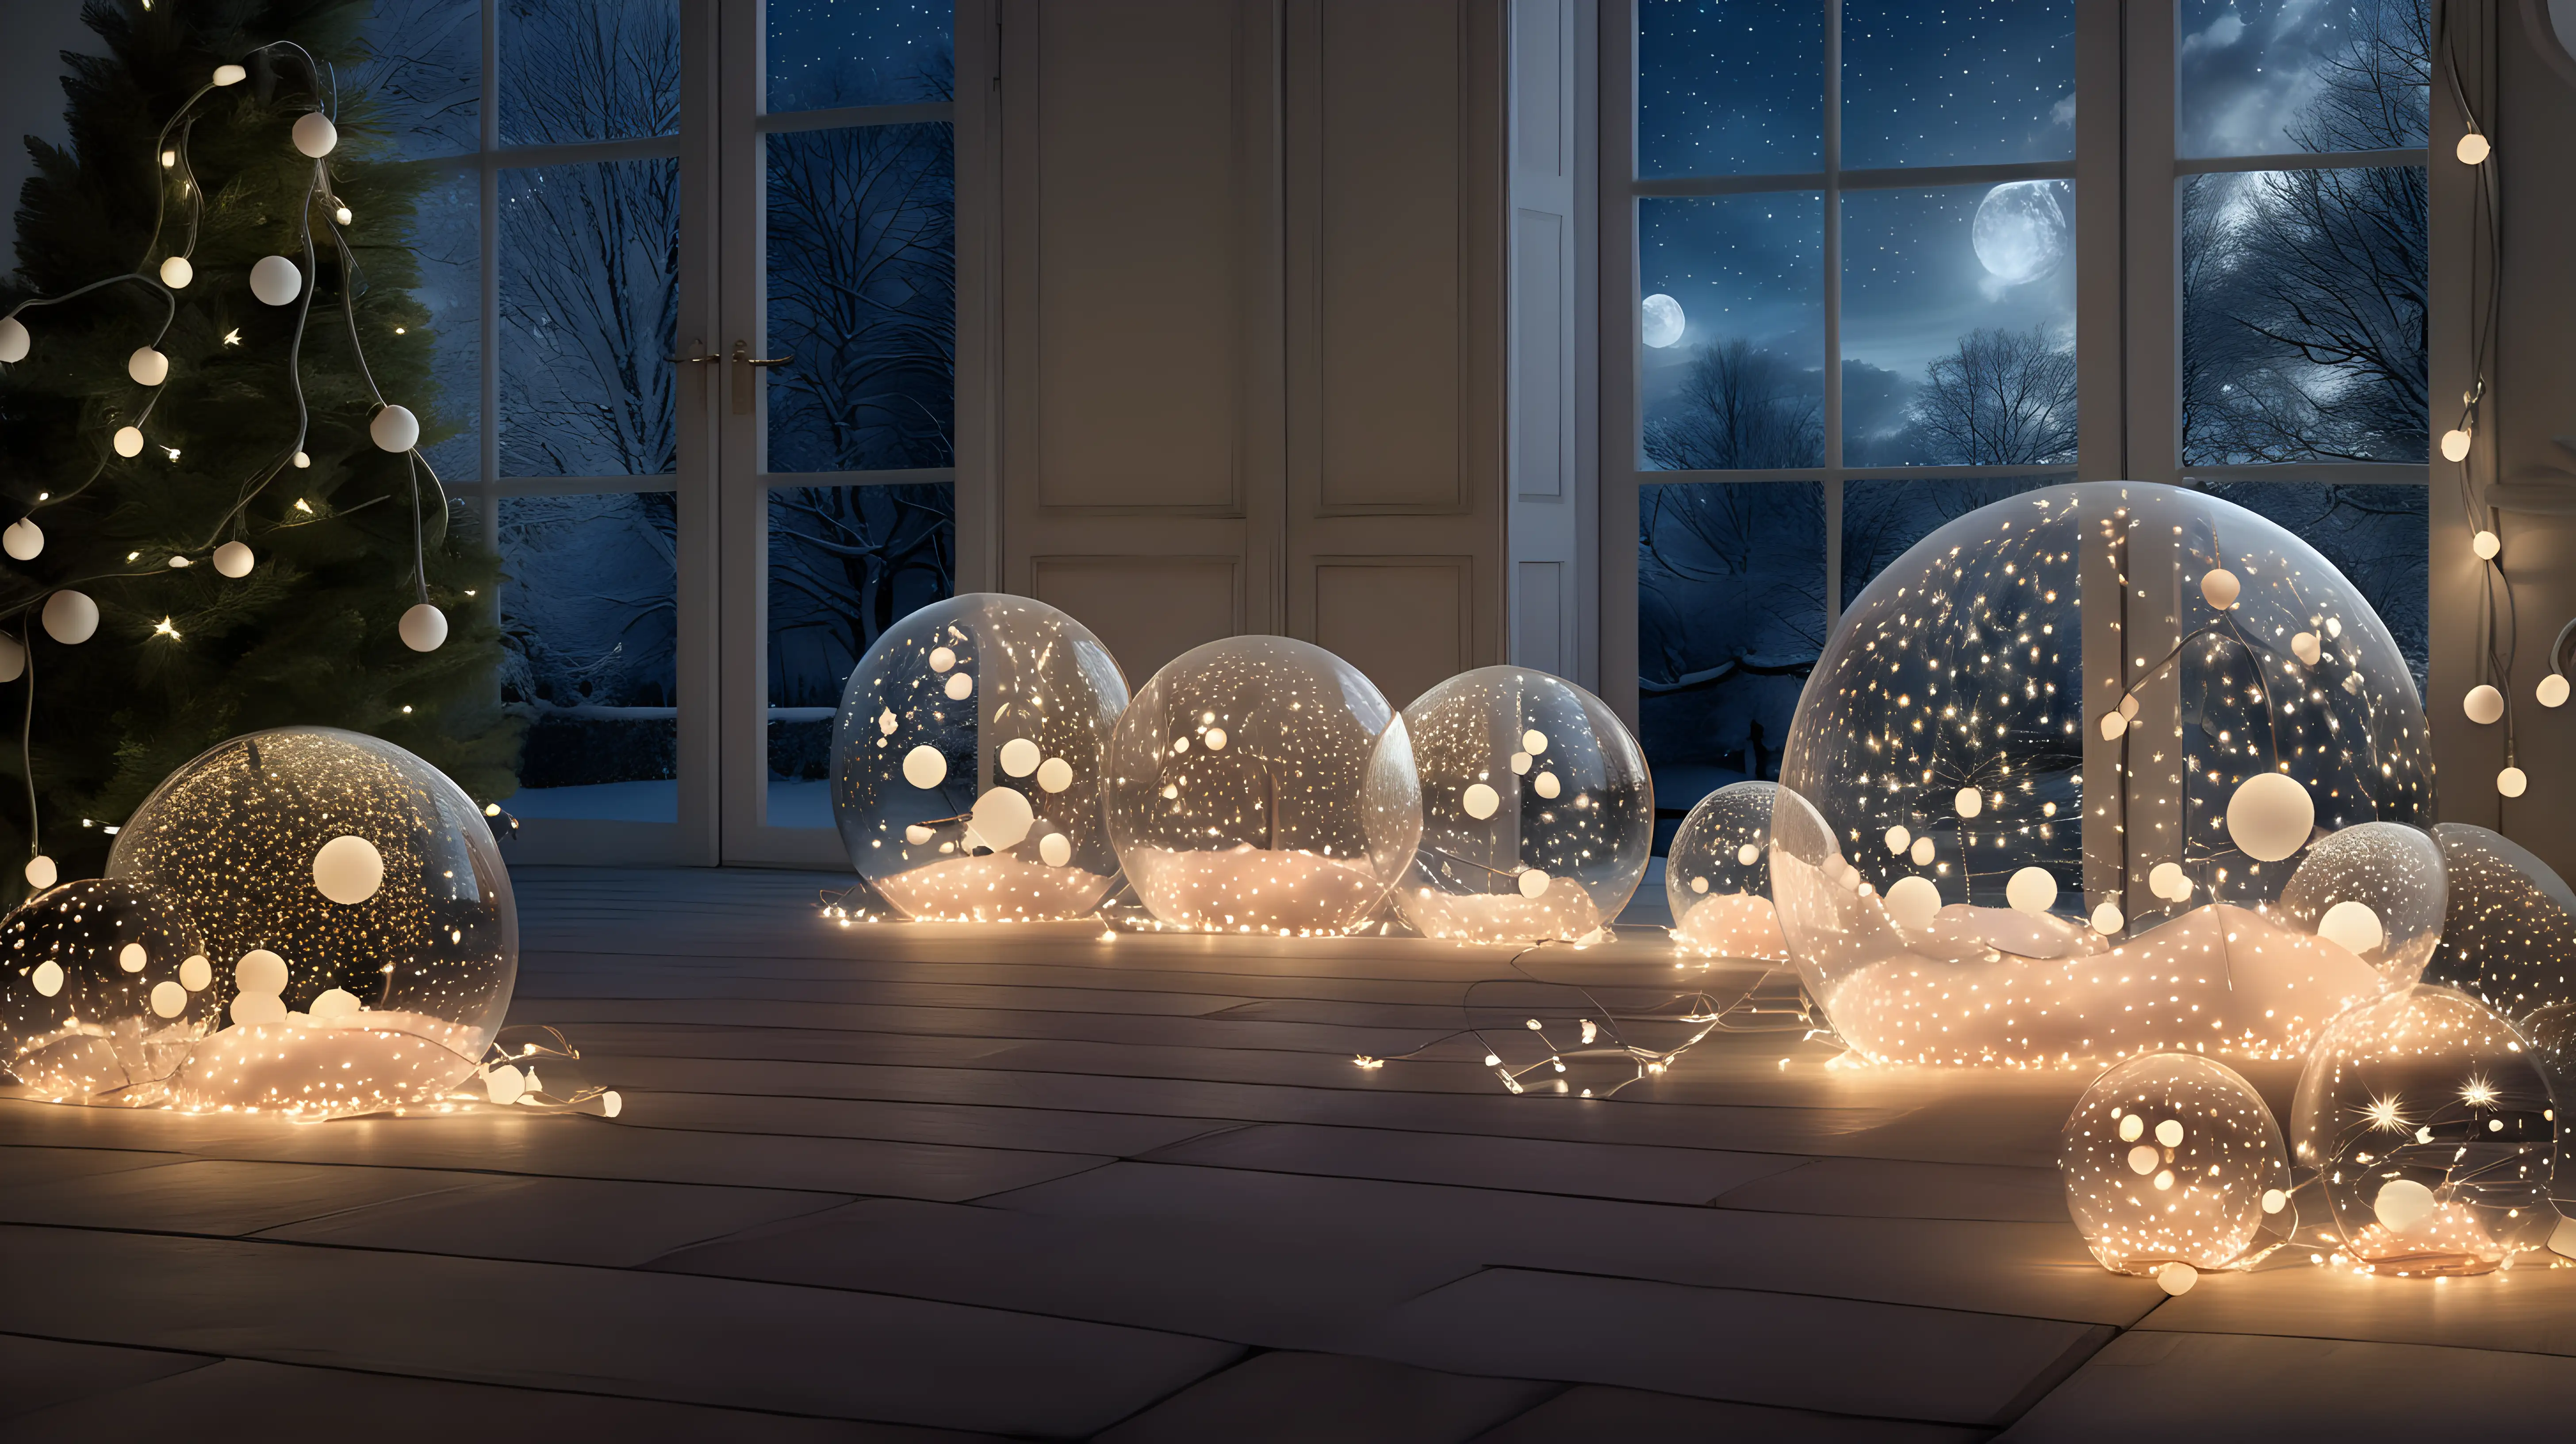 Fairy Lights Fantasy: Create a whimsical scene by arranging the luminous spheres to mimic fairy lights, casting a magical and enchanting atmosphere.



